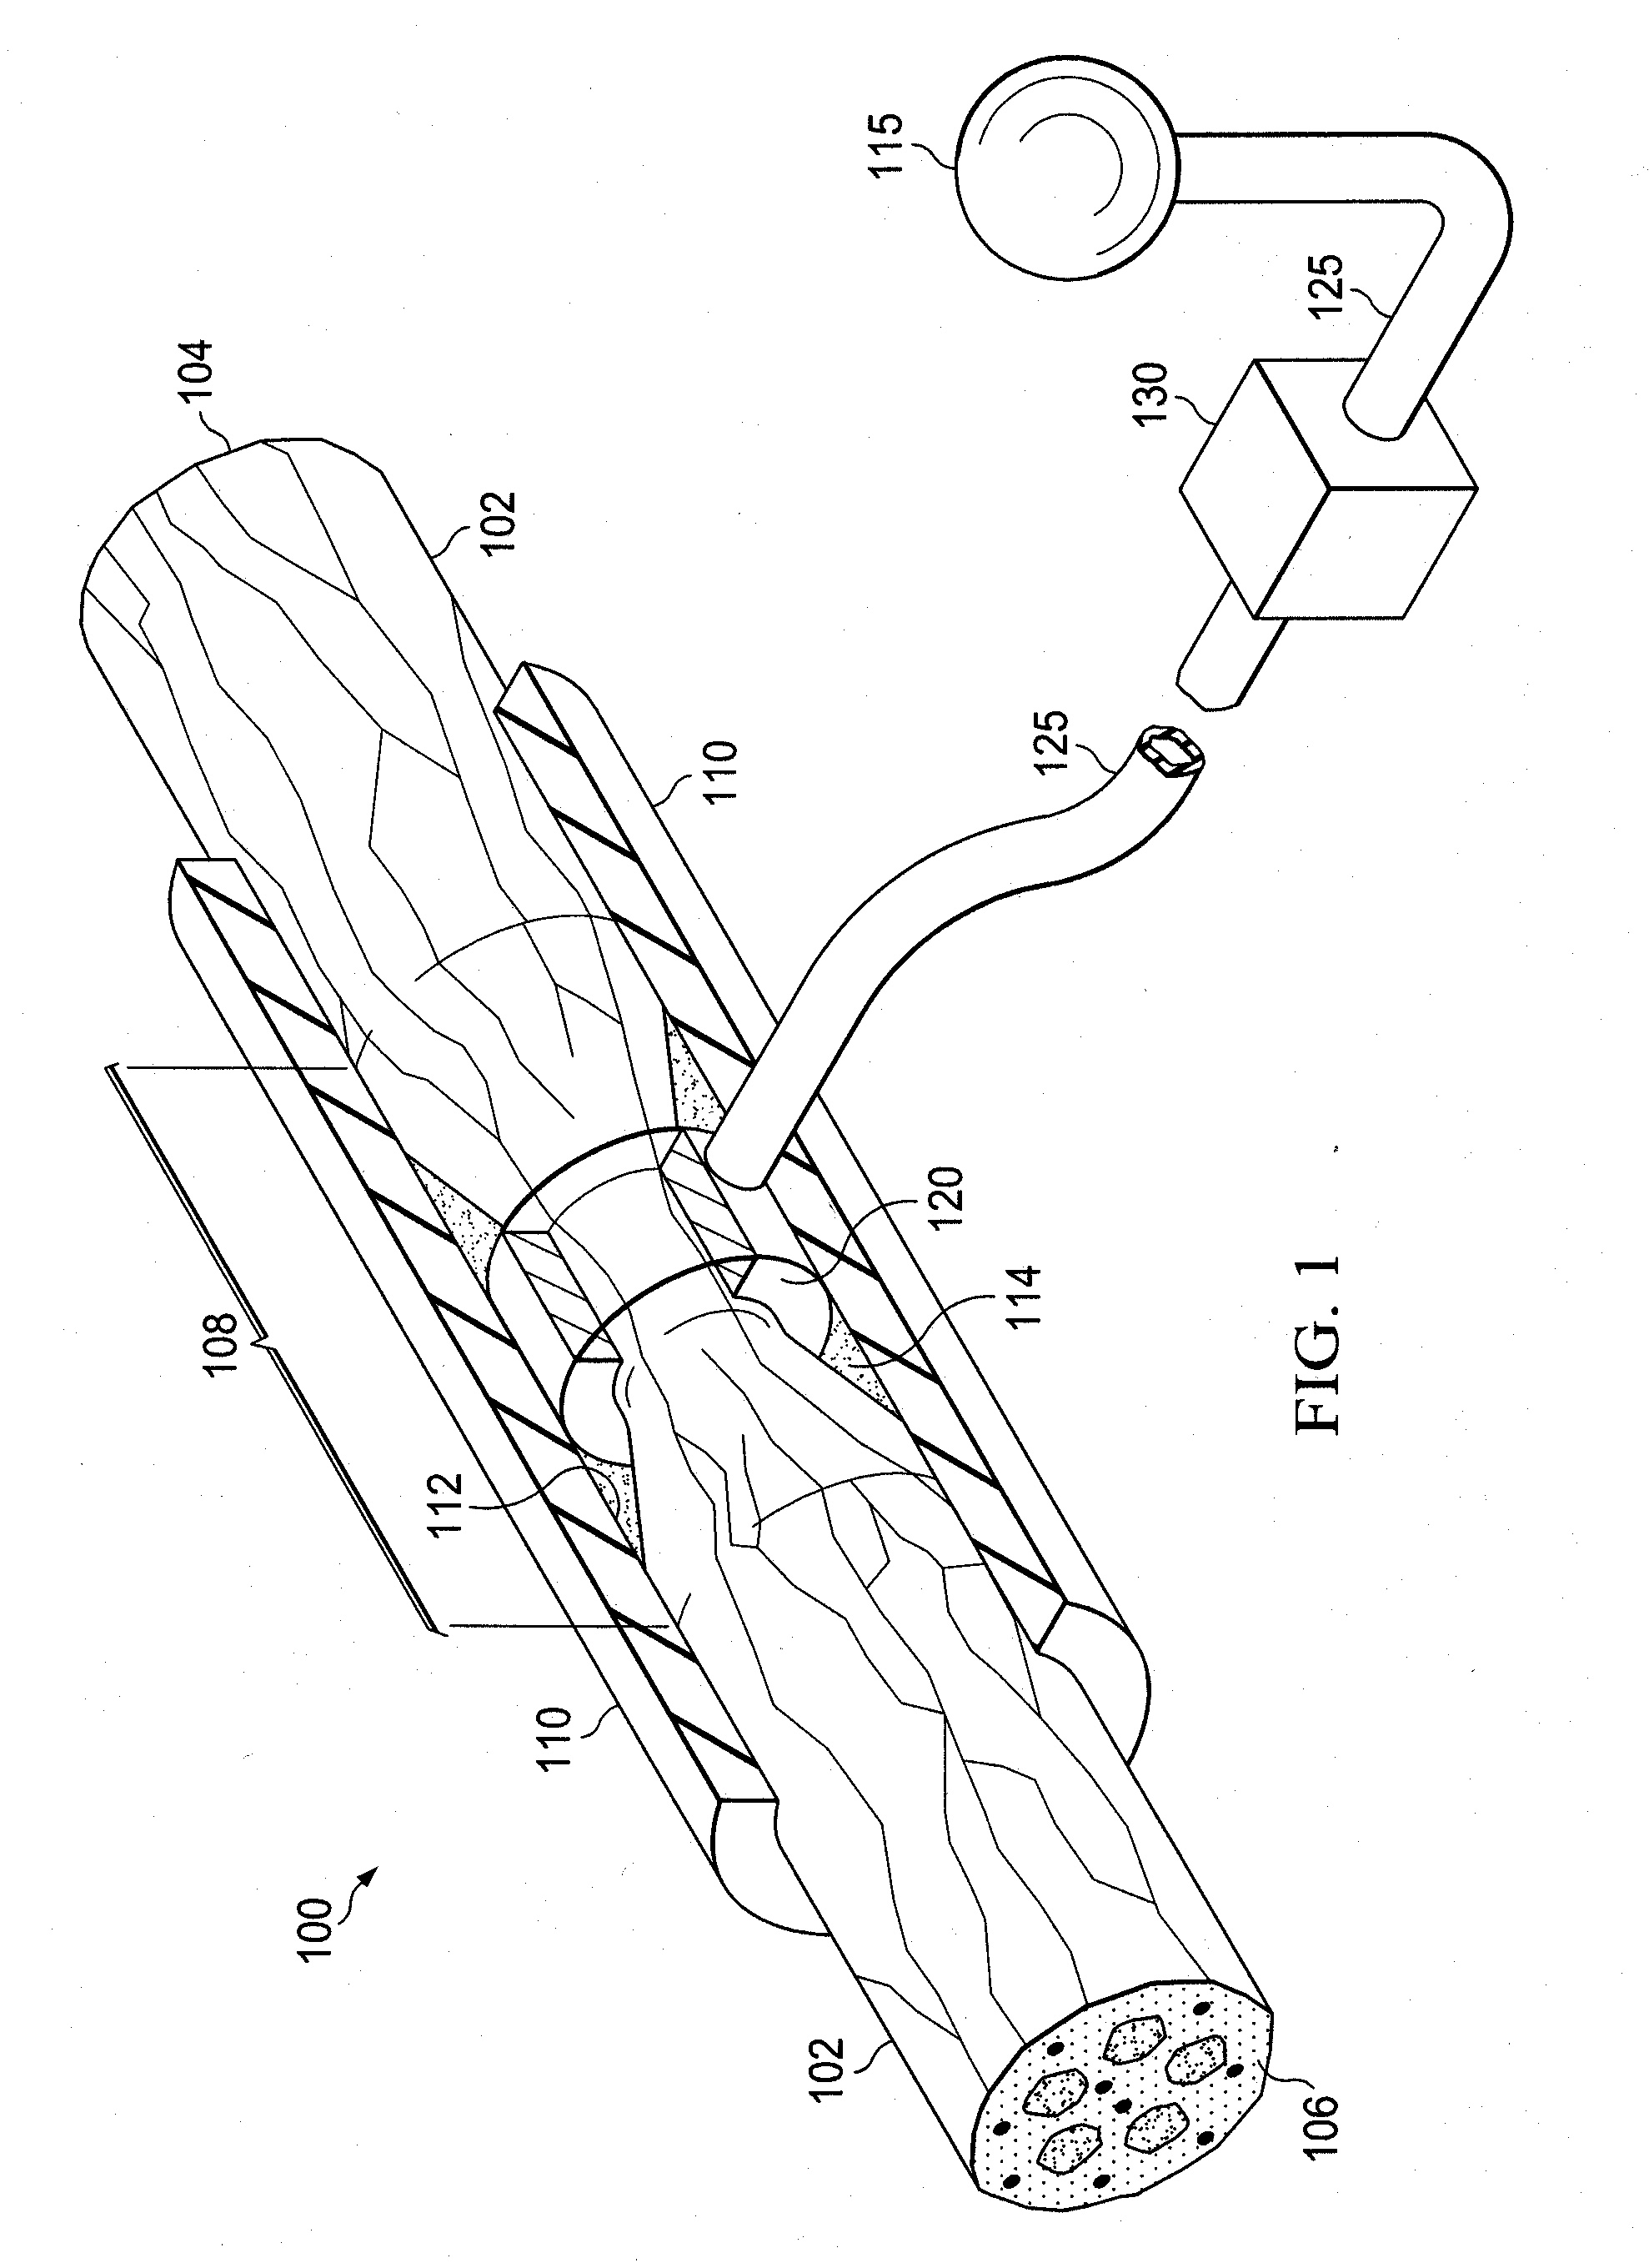 System for providing fluid flow to nerve tissues